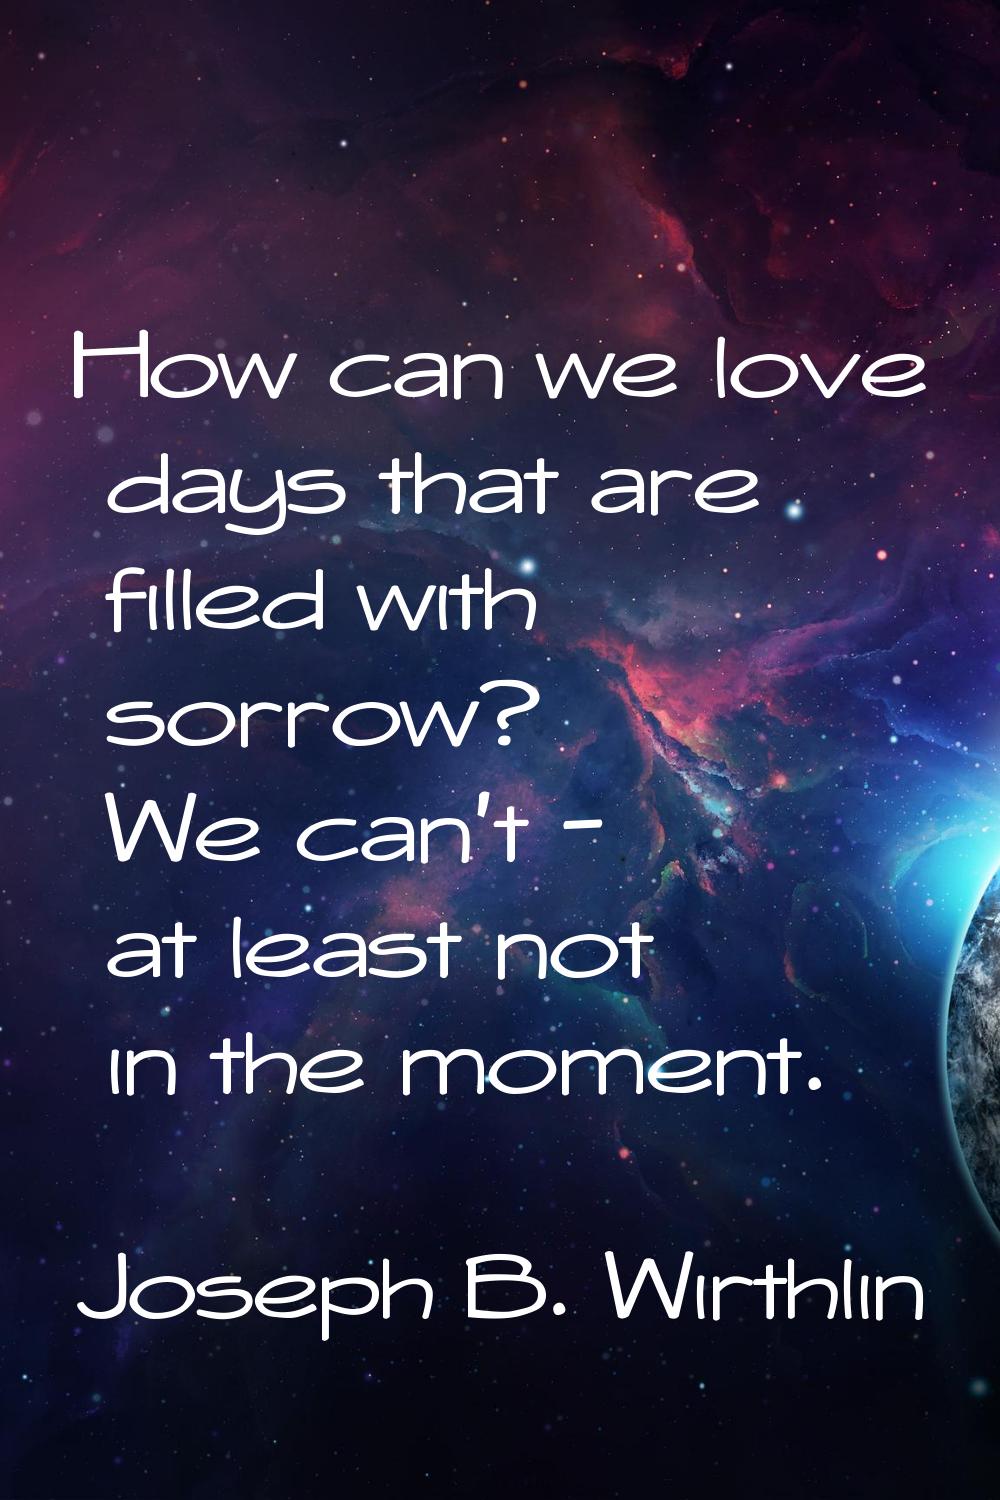 How can we love days that are filled with sorrow? We can't - at least not in the moment.